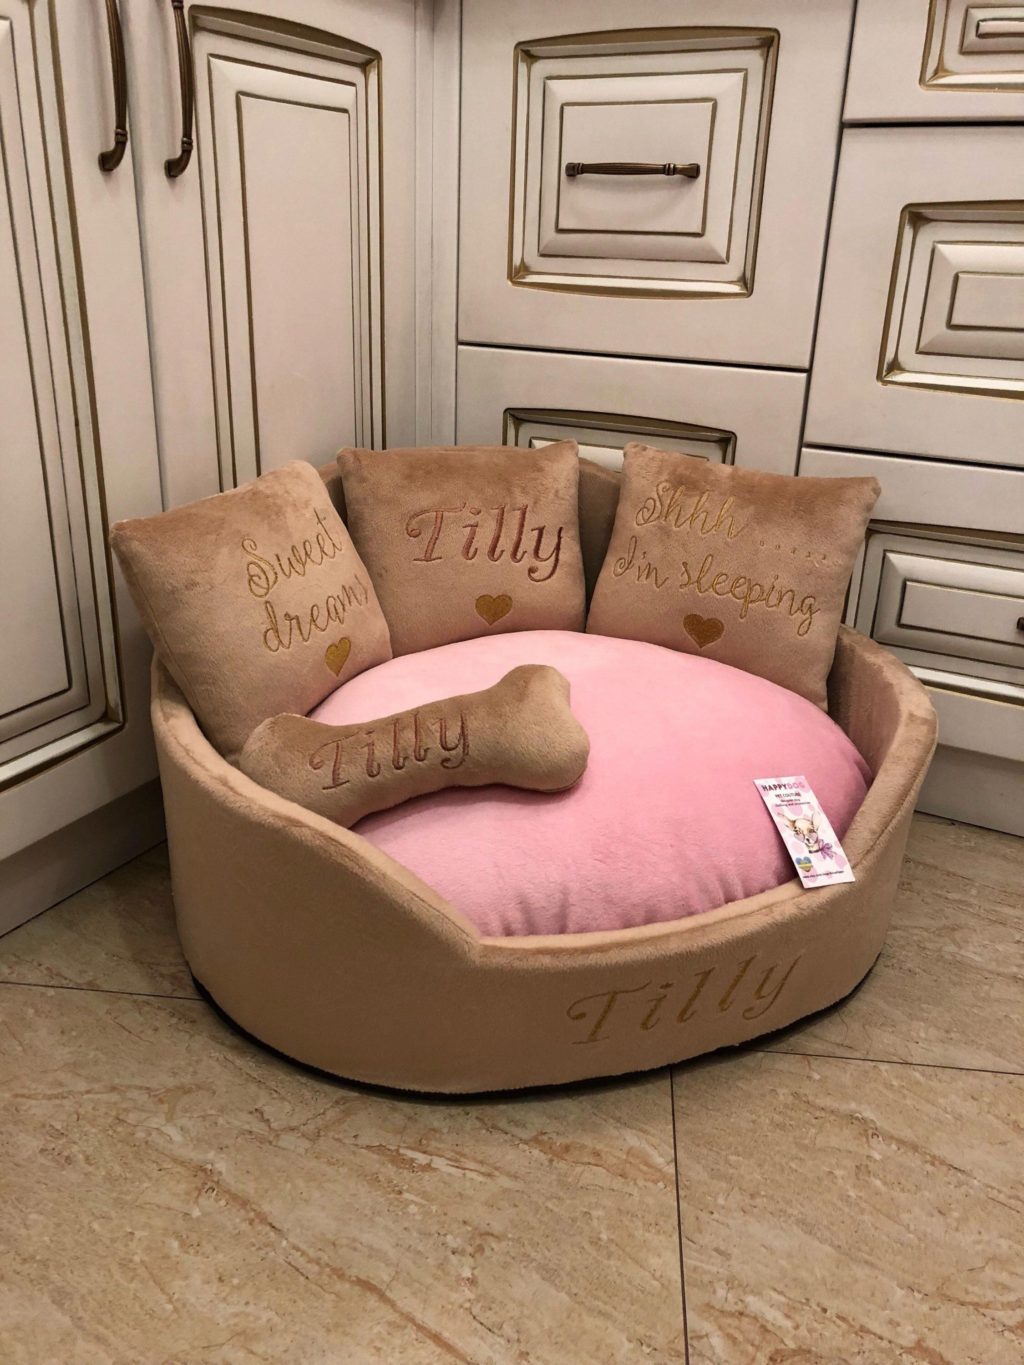 royal bed. +80 Adorable Dog Bed Designs That Will Surprise You - 3